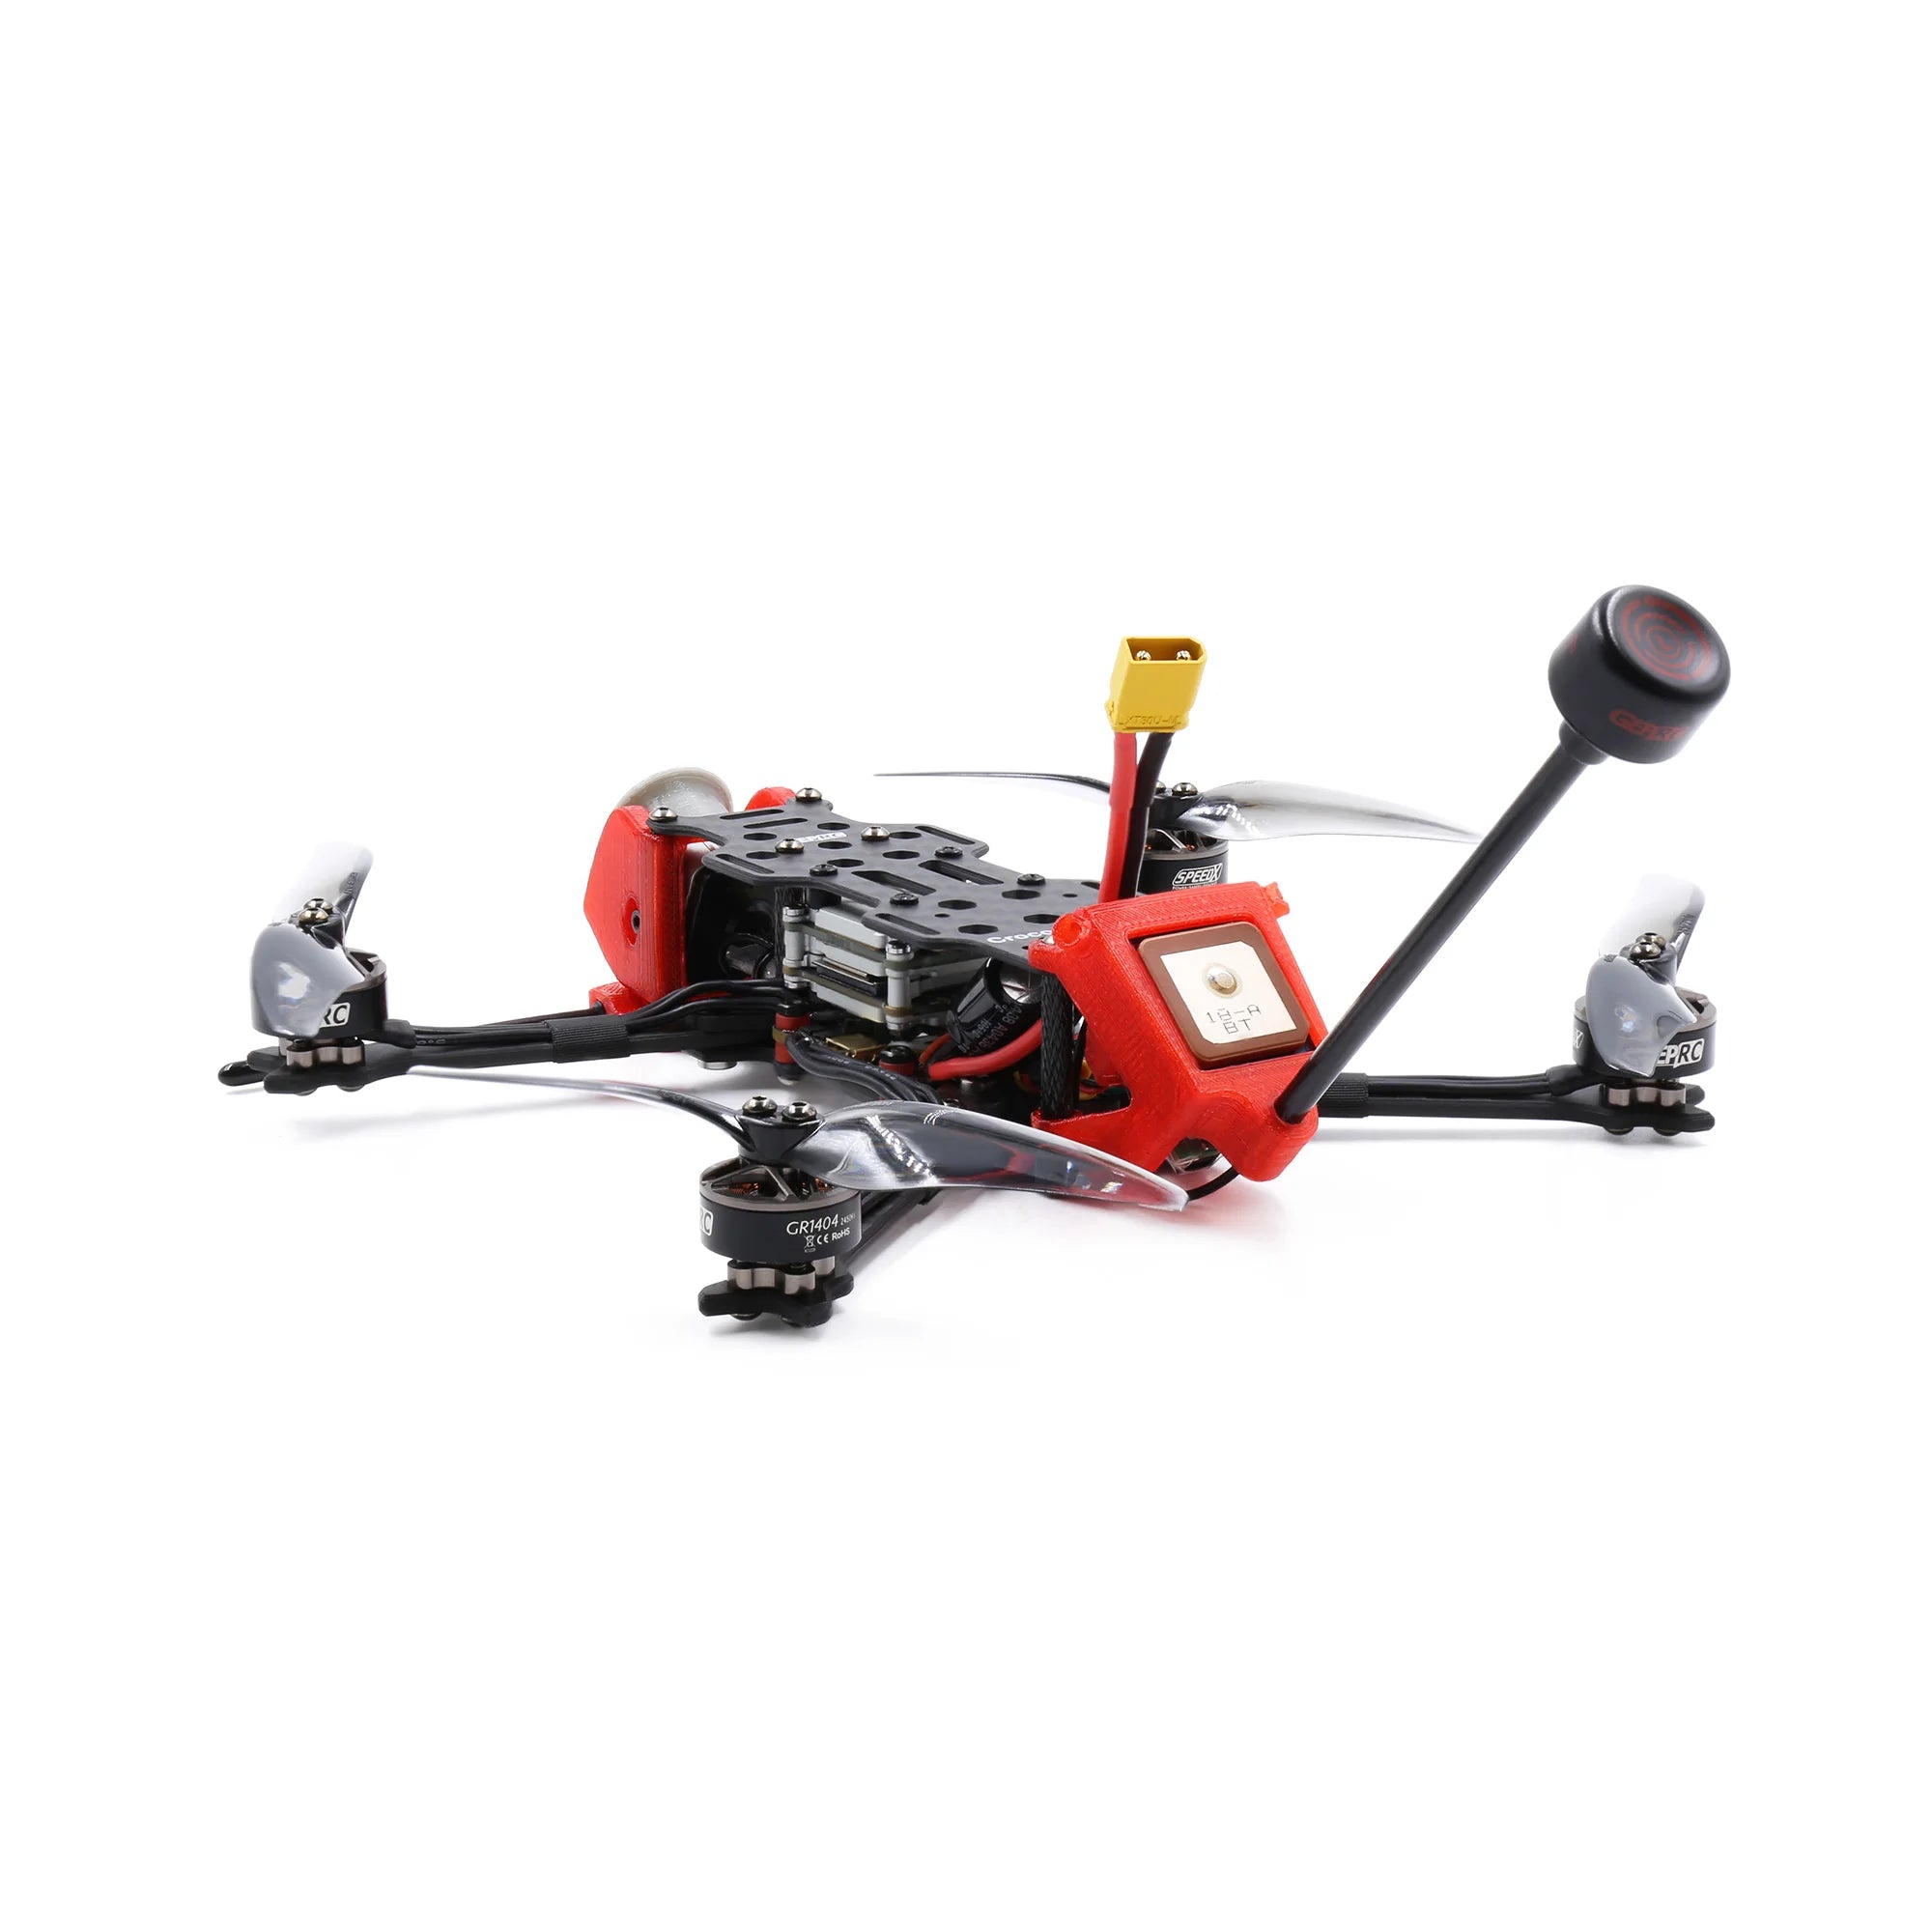 GEPRC Crocodile Baby 4 FPV Drone, ,The Rescue mode won’t landing automatically.